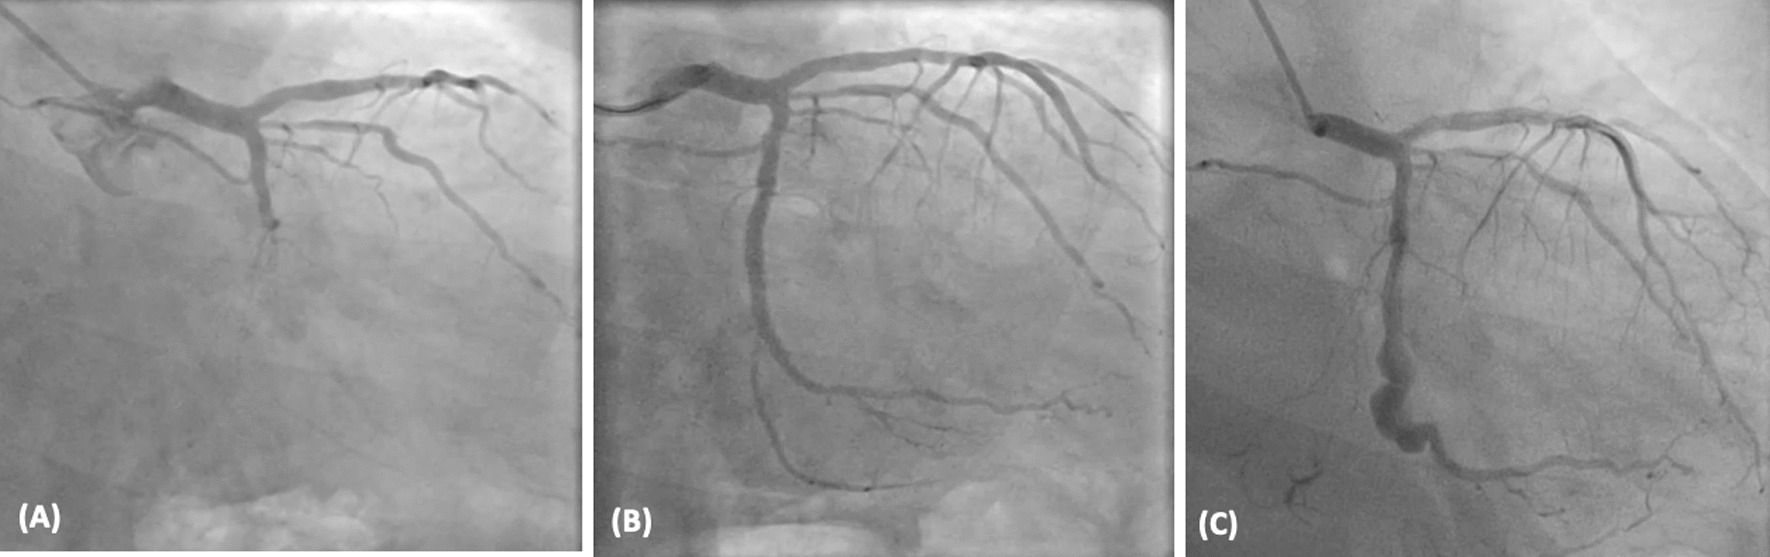 A case report of left circumflex stent infection and mycotic aneurysm: a rare but life-threatening complication of percutaneous coronary intervention